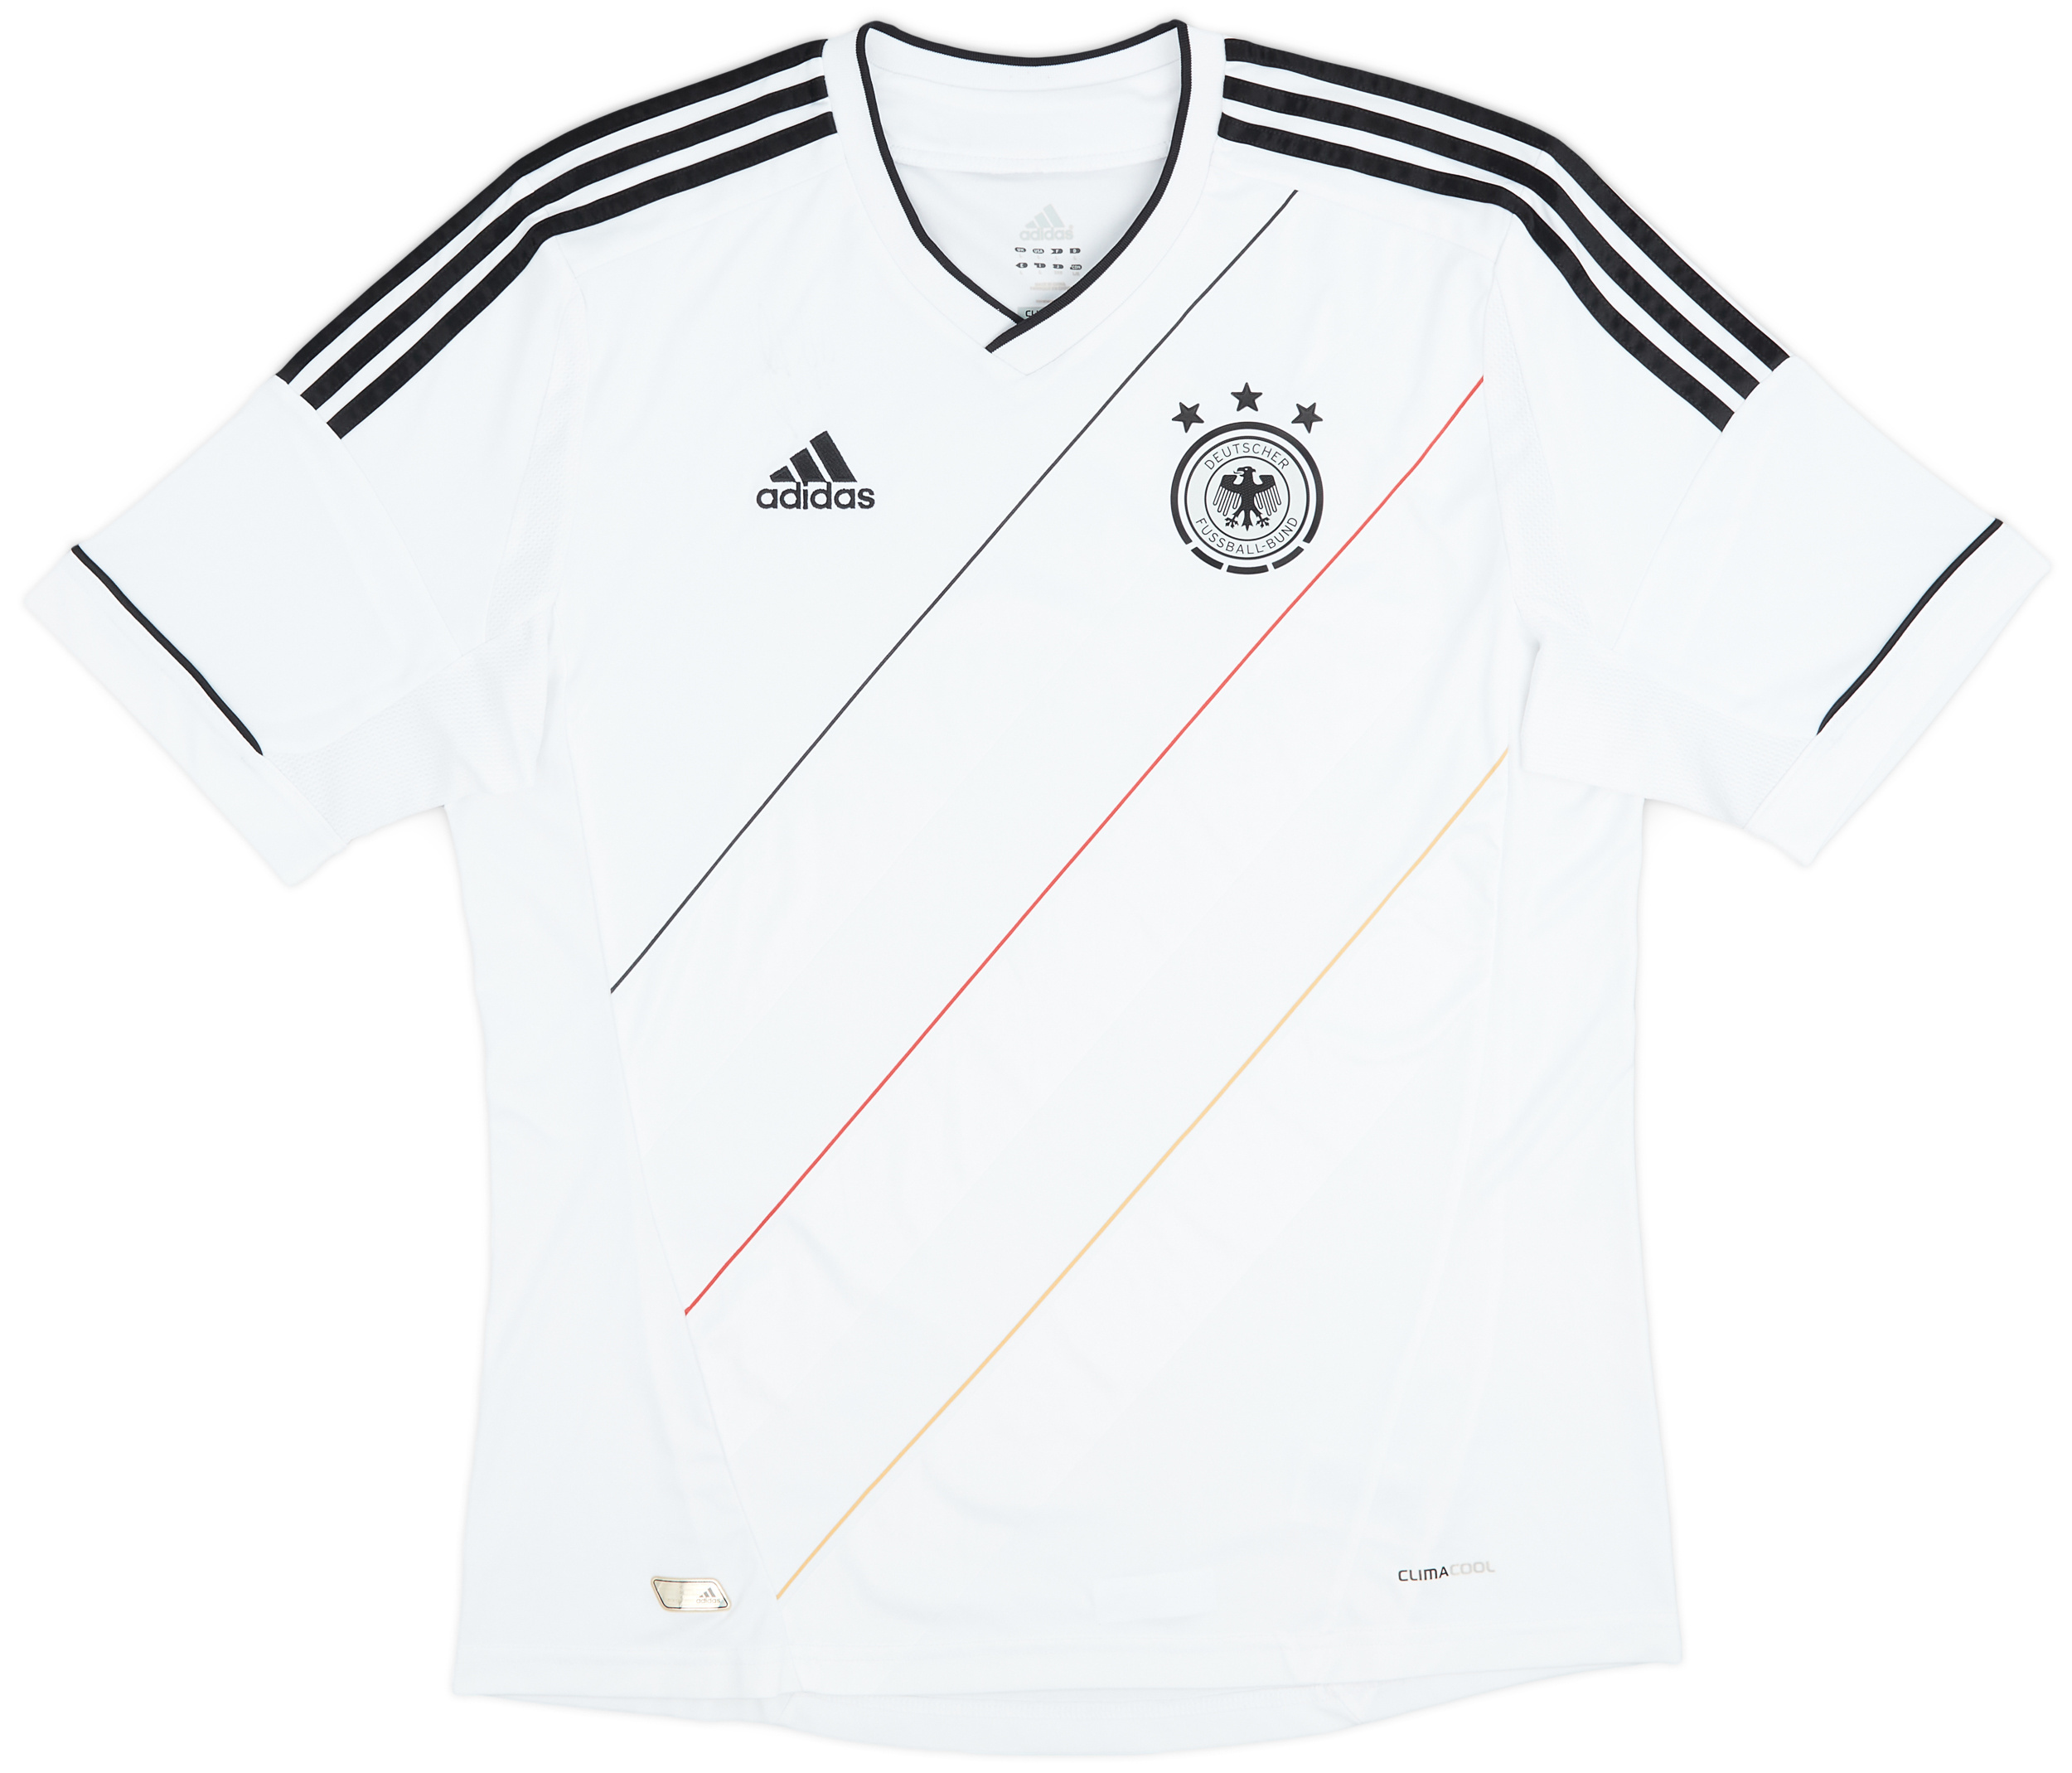 2012-13 Germany Signed Home Shirt - 9/10 - ()